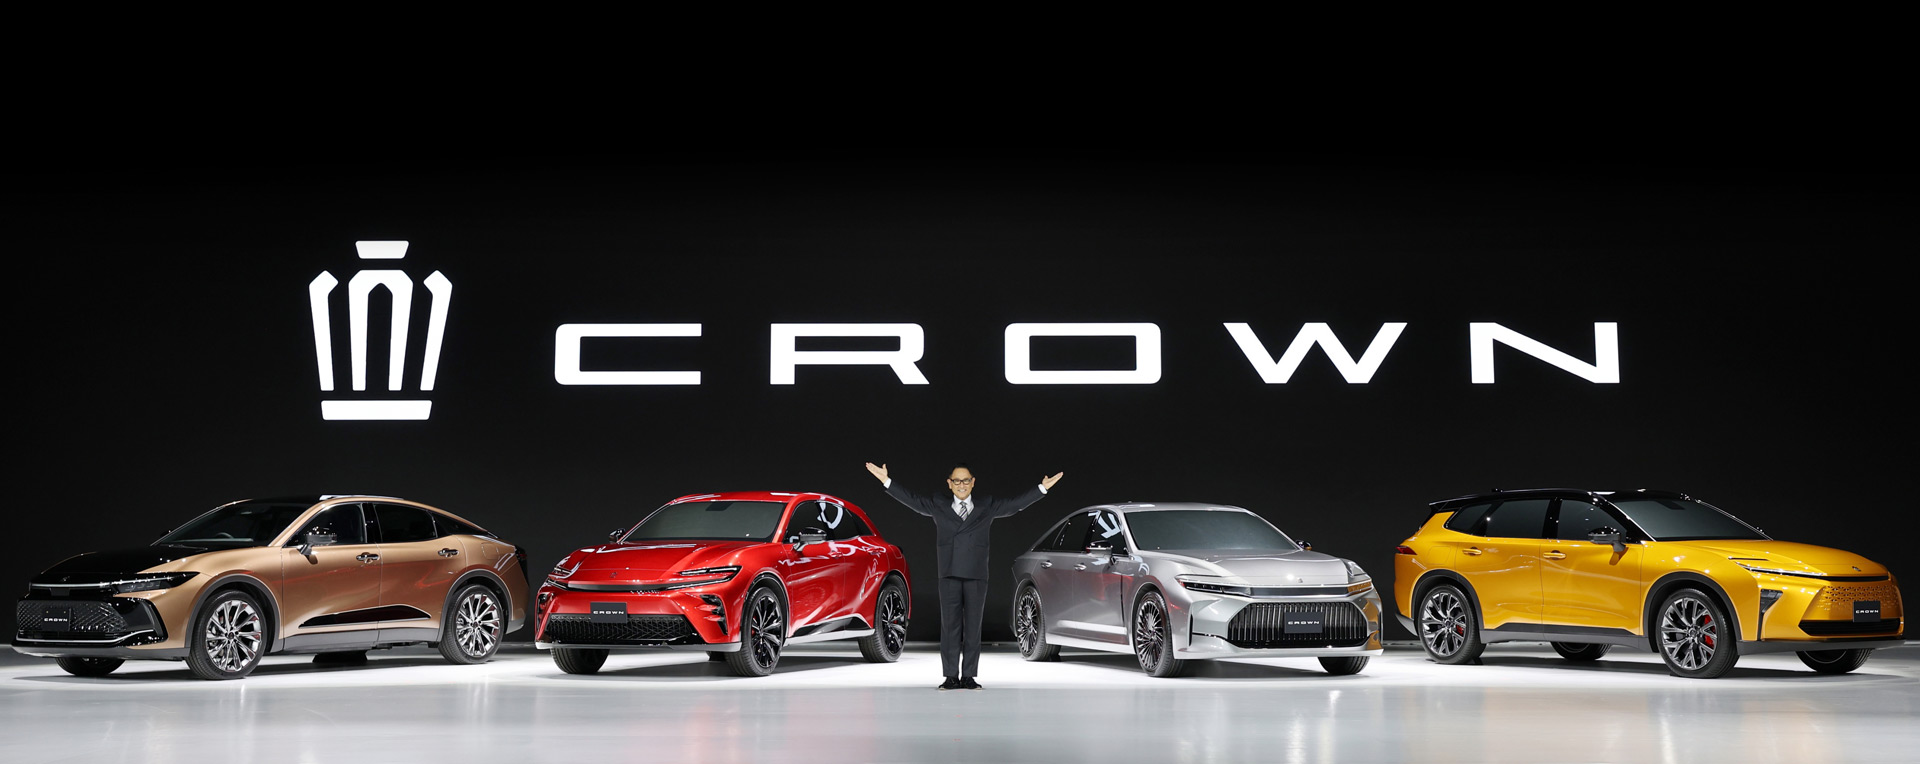 New Toyota Crown to spawn family of 4 body styles Auto Recent